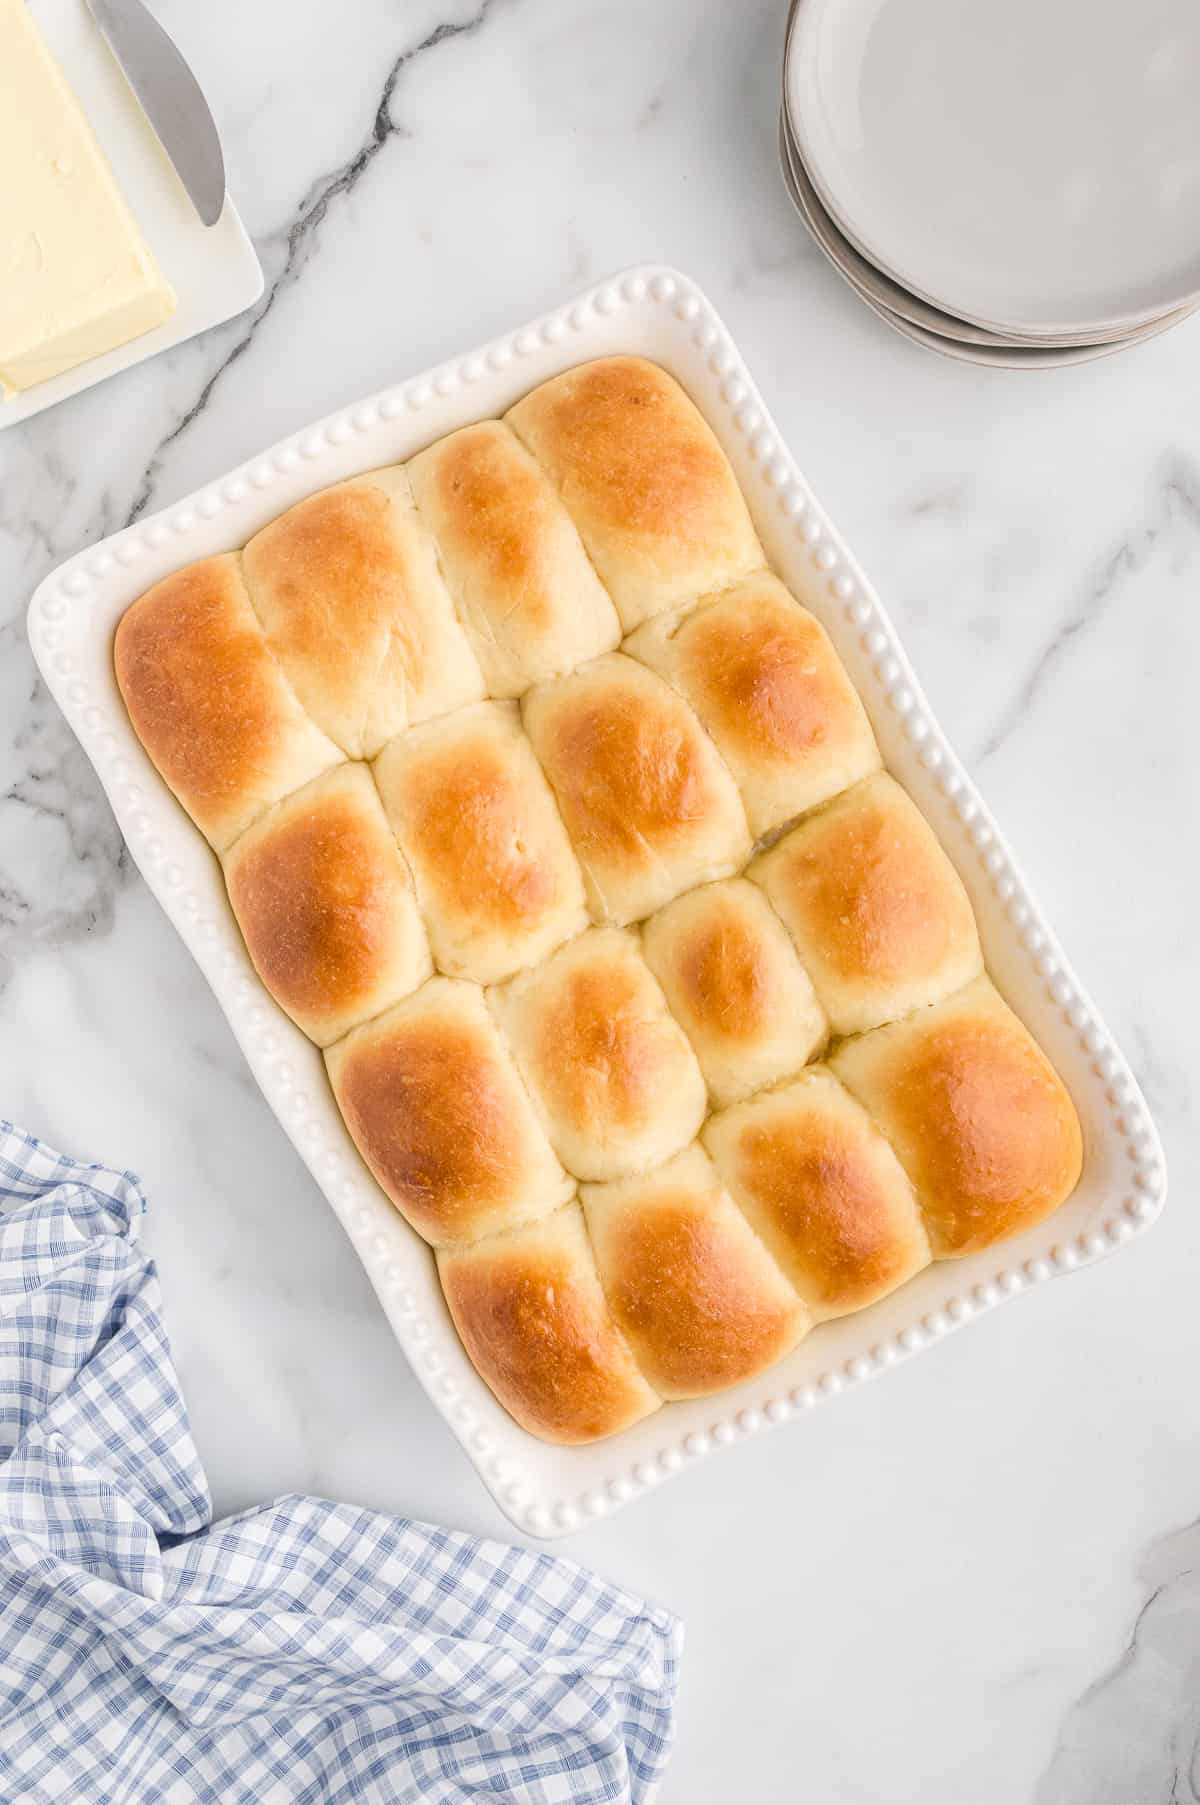 16 golden brown potato dinner rolls in white baking dish with plates, linen, and butter around them